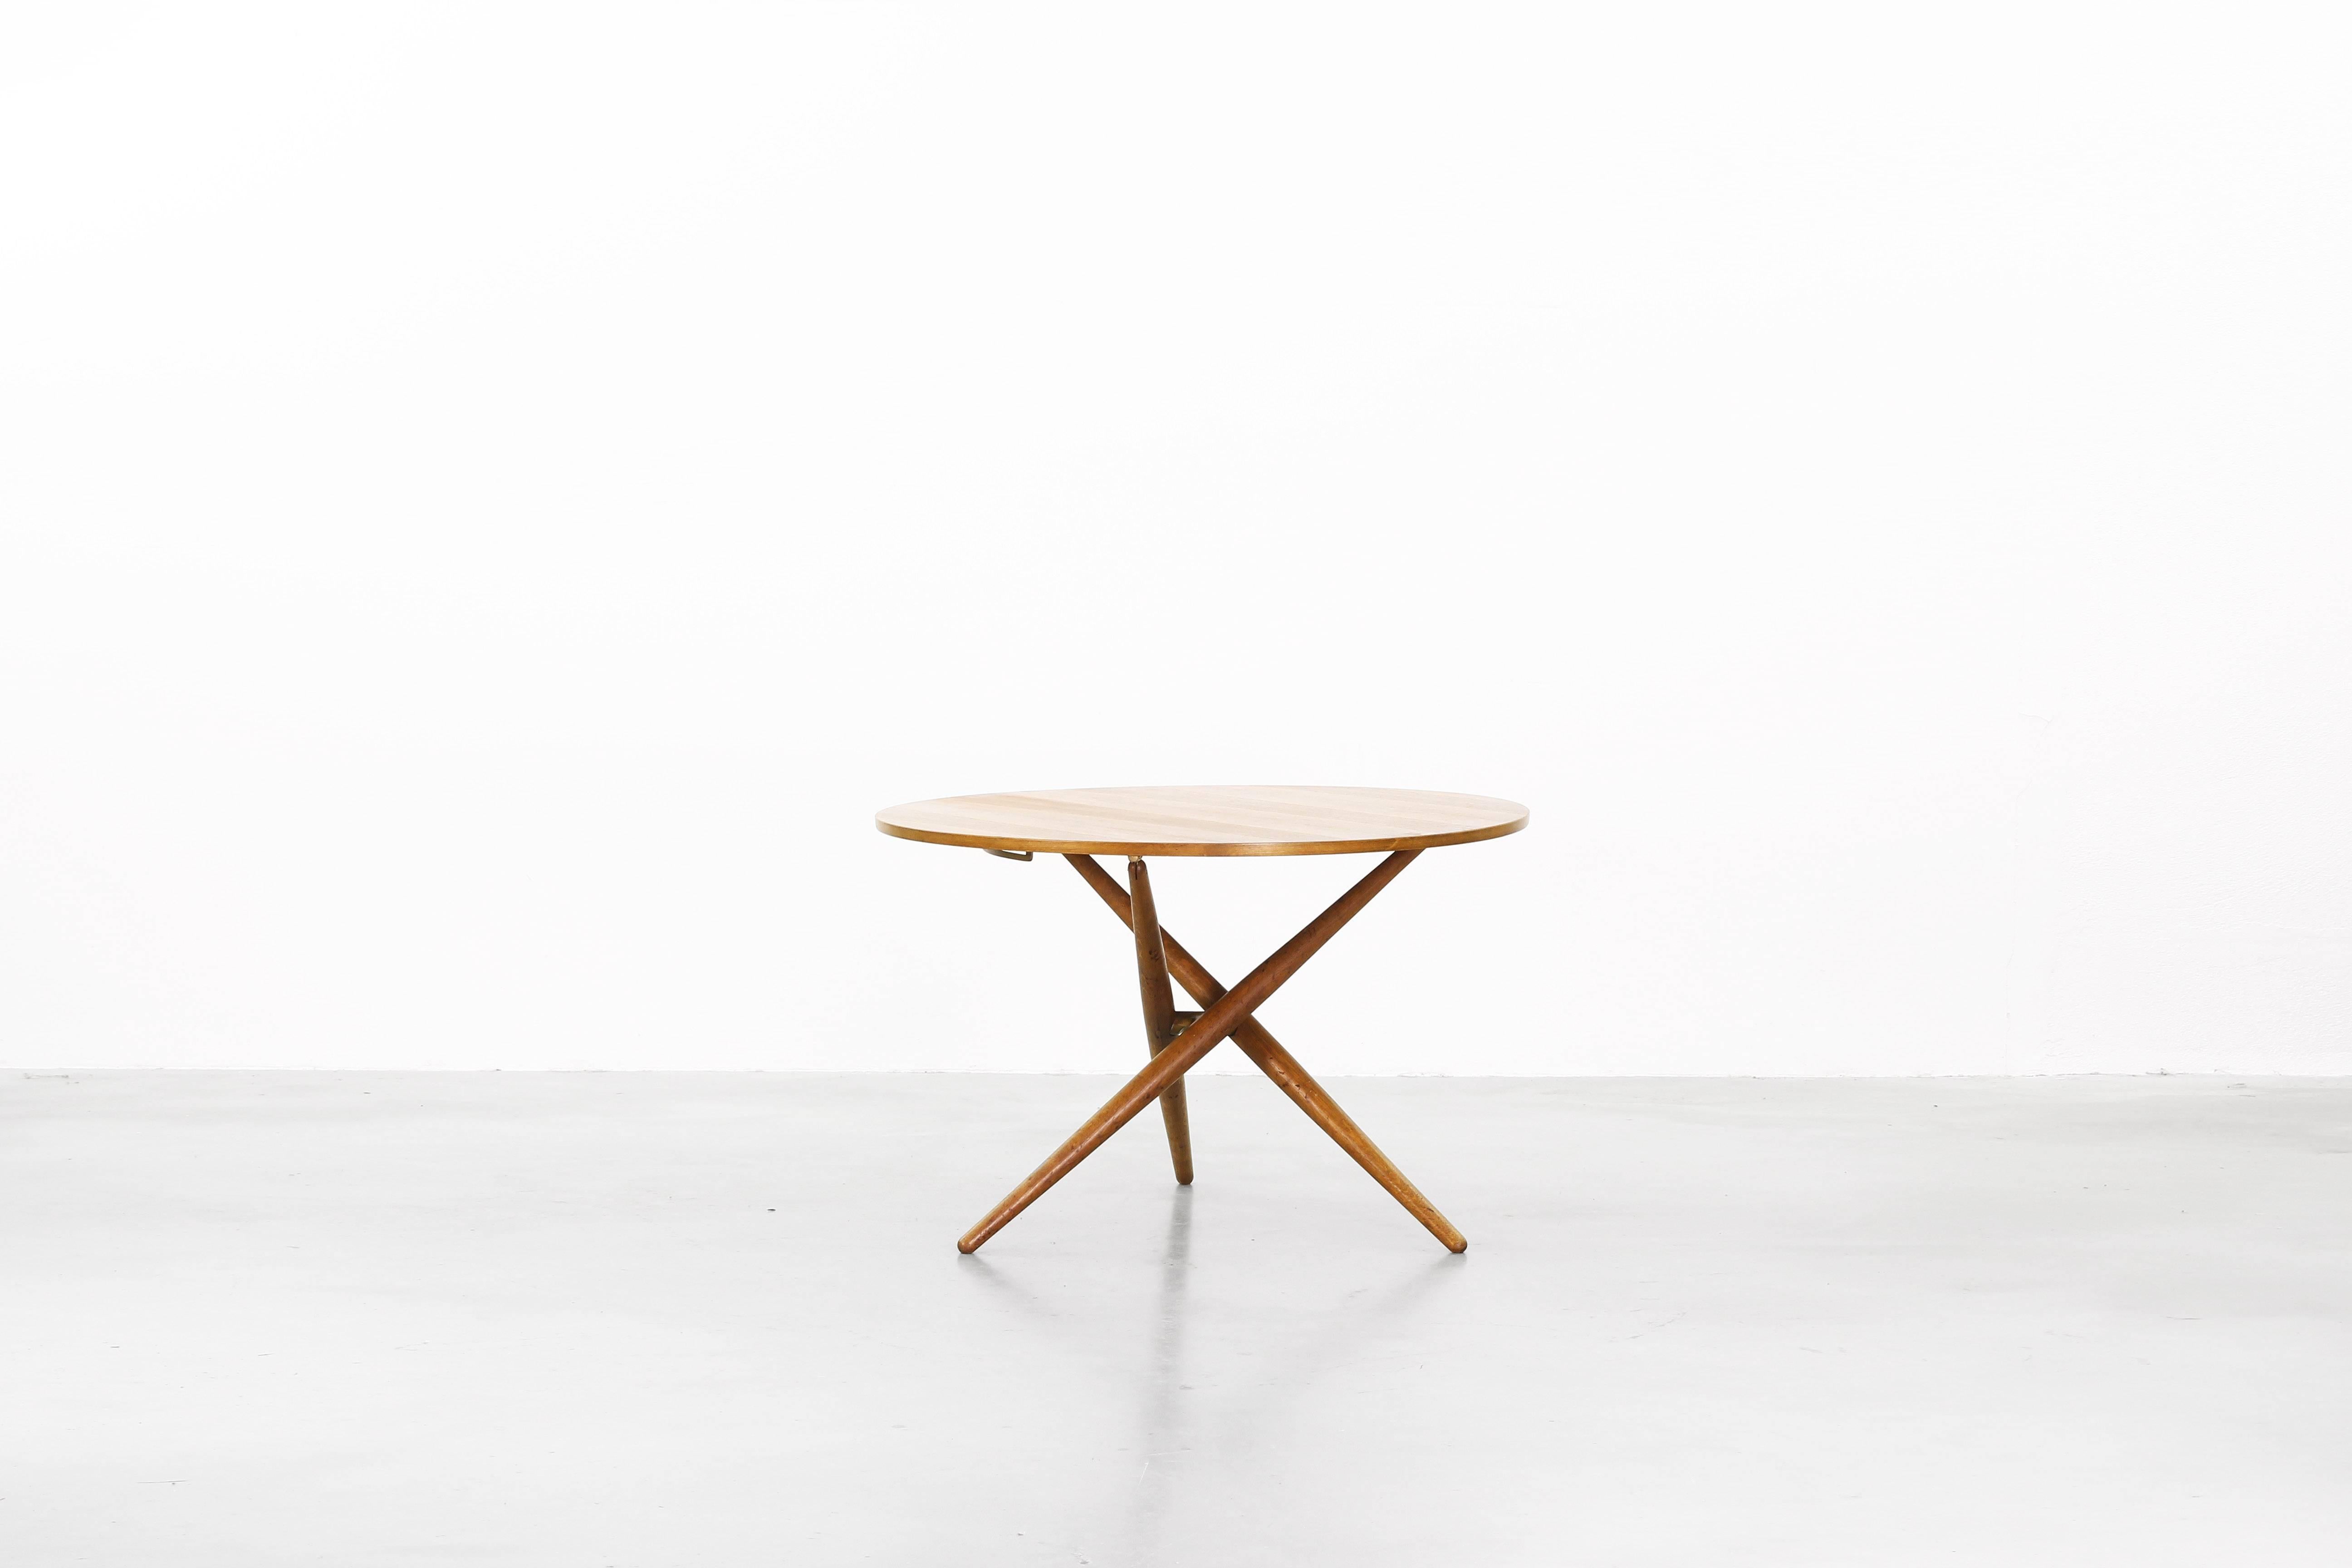 Very beautiful height adjustable dining/coffee table designed by Jürg Bally for Wohnbedarf, Zürich, Switzerland in the 1950ies. The table is made of teak and brass elements and is in a very good condition. There is one professionally repaired veneer